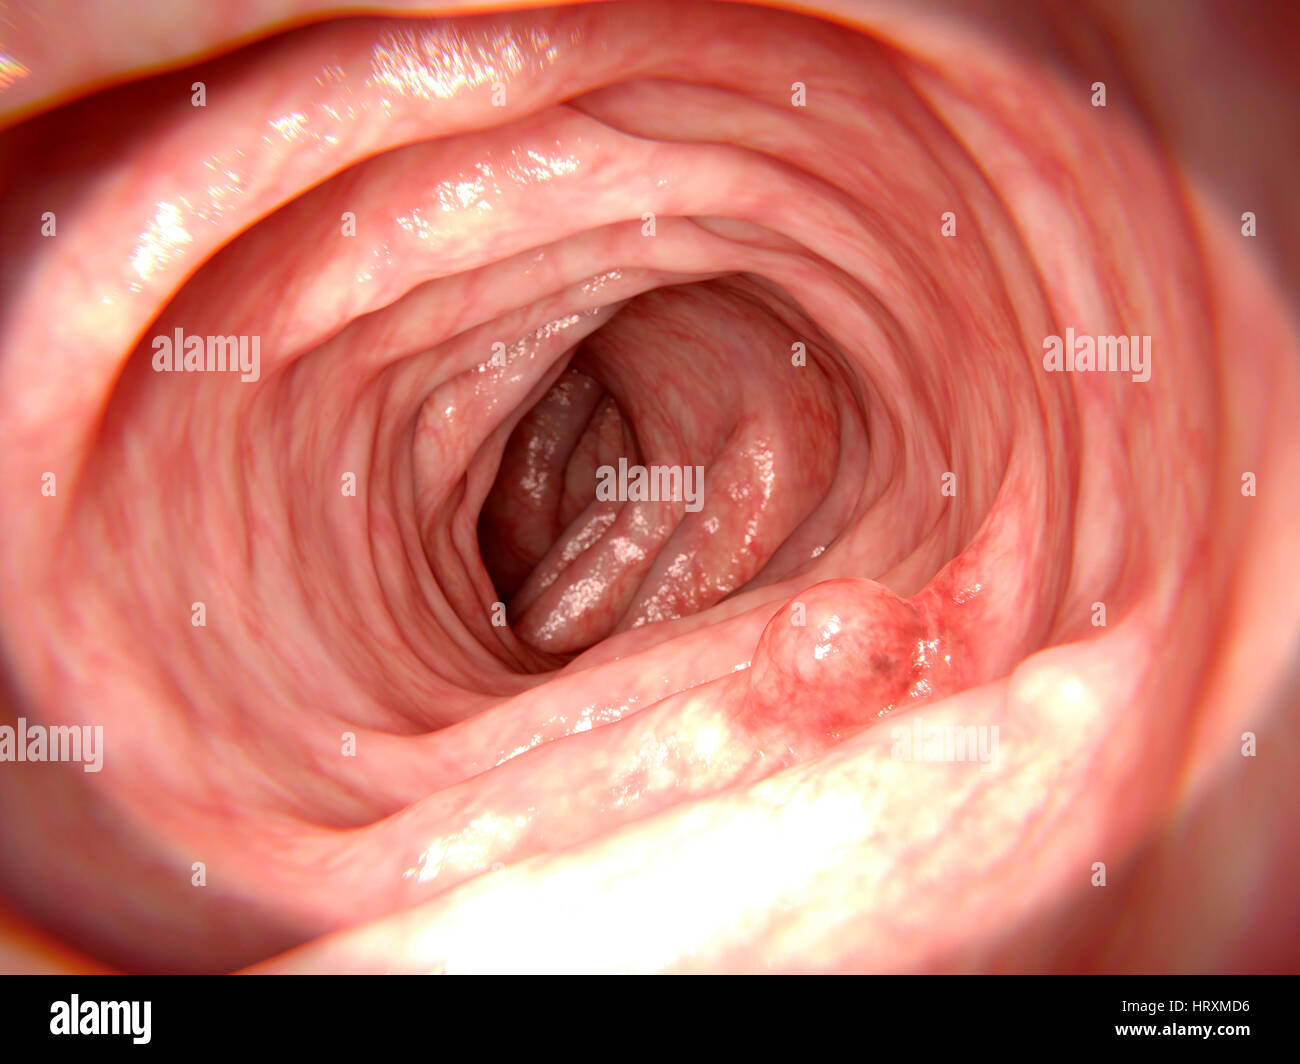 Computer illustration of an adenomatous polyp in the intestine. Polyps are abnormal growths that arise from the mucus lining of the intestine. Although adenomatous polyps start off benign (non-cancerous), as they grow they almost always become malignant (cancerous). Stock Photo